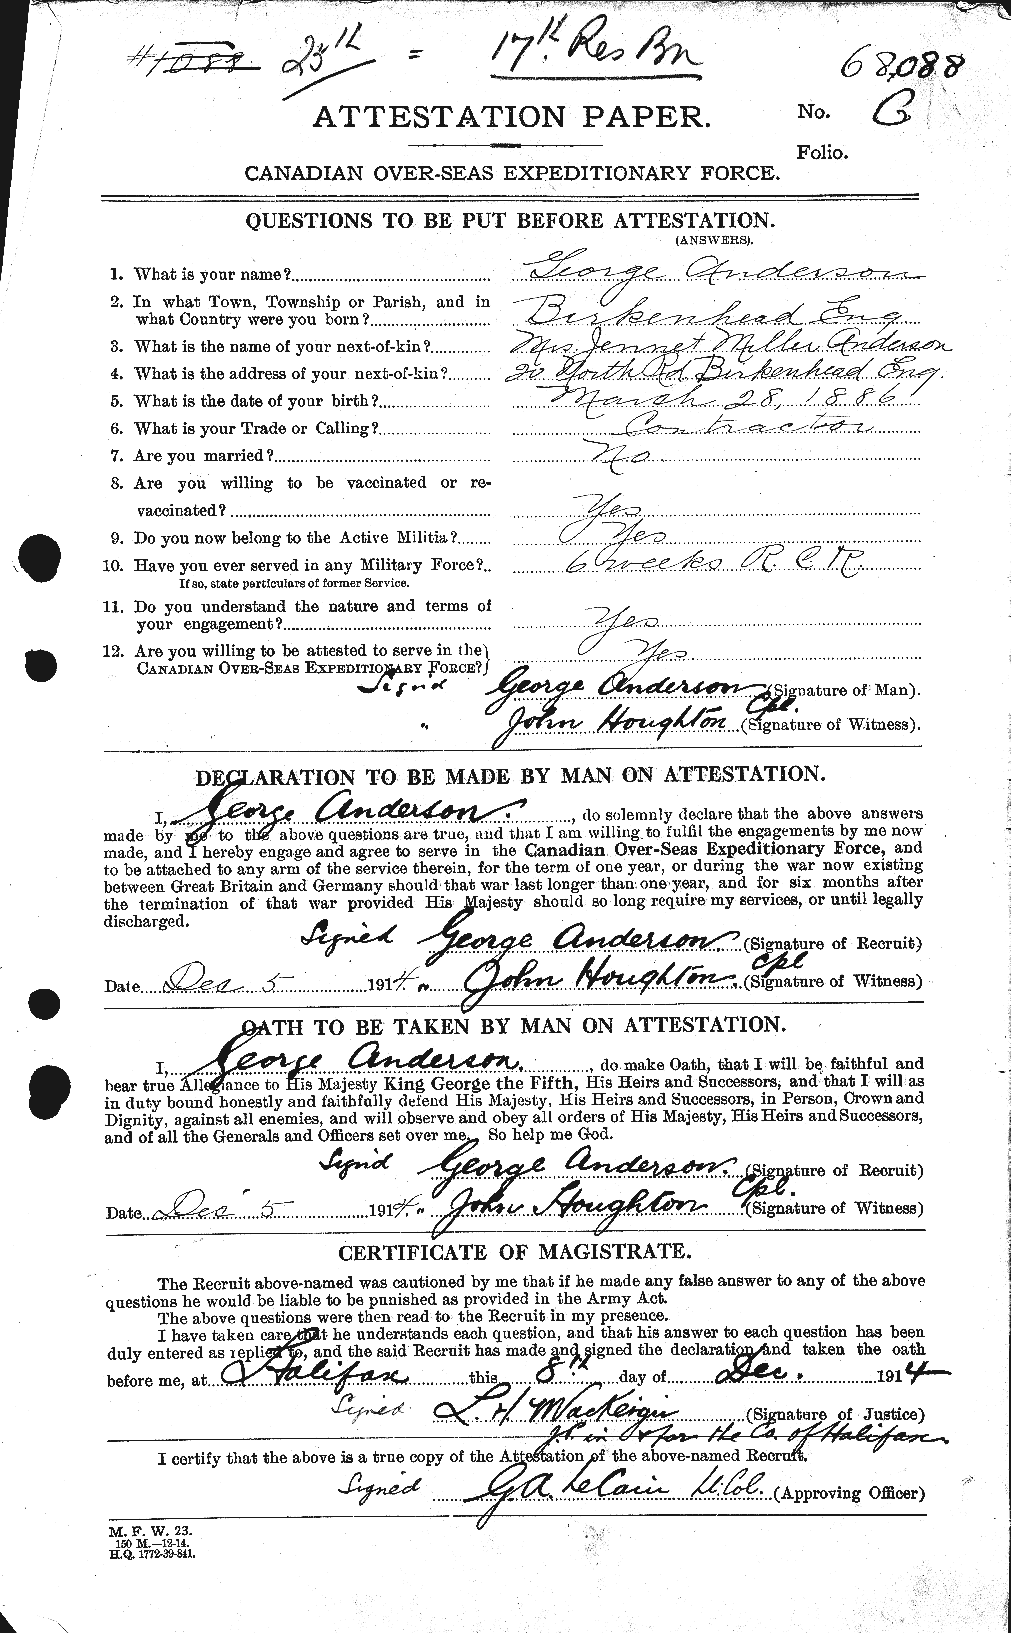 Personnel Records of the First World War - CEF 209770a